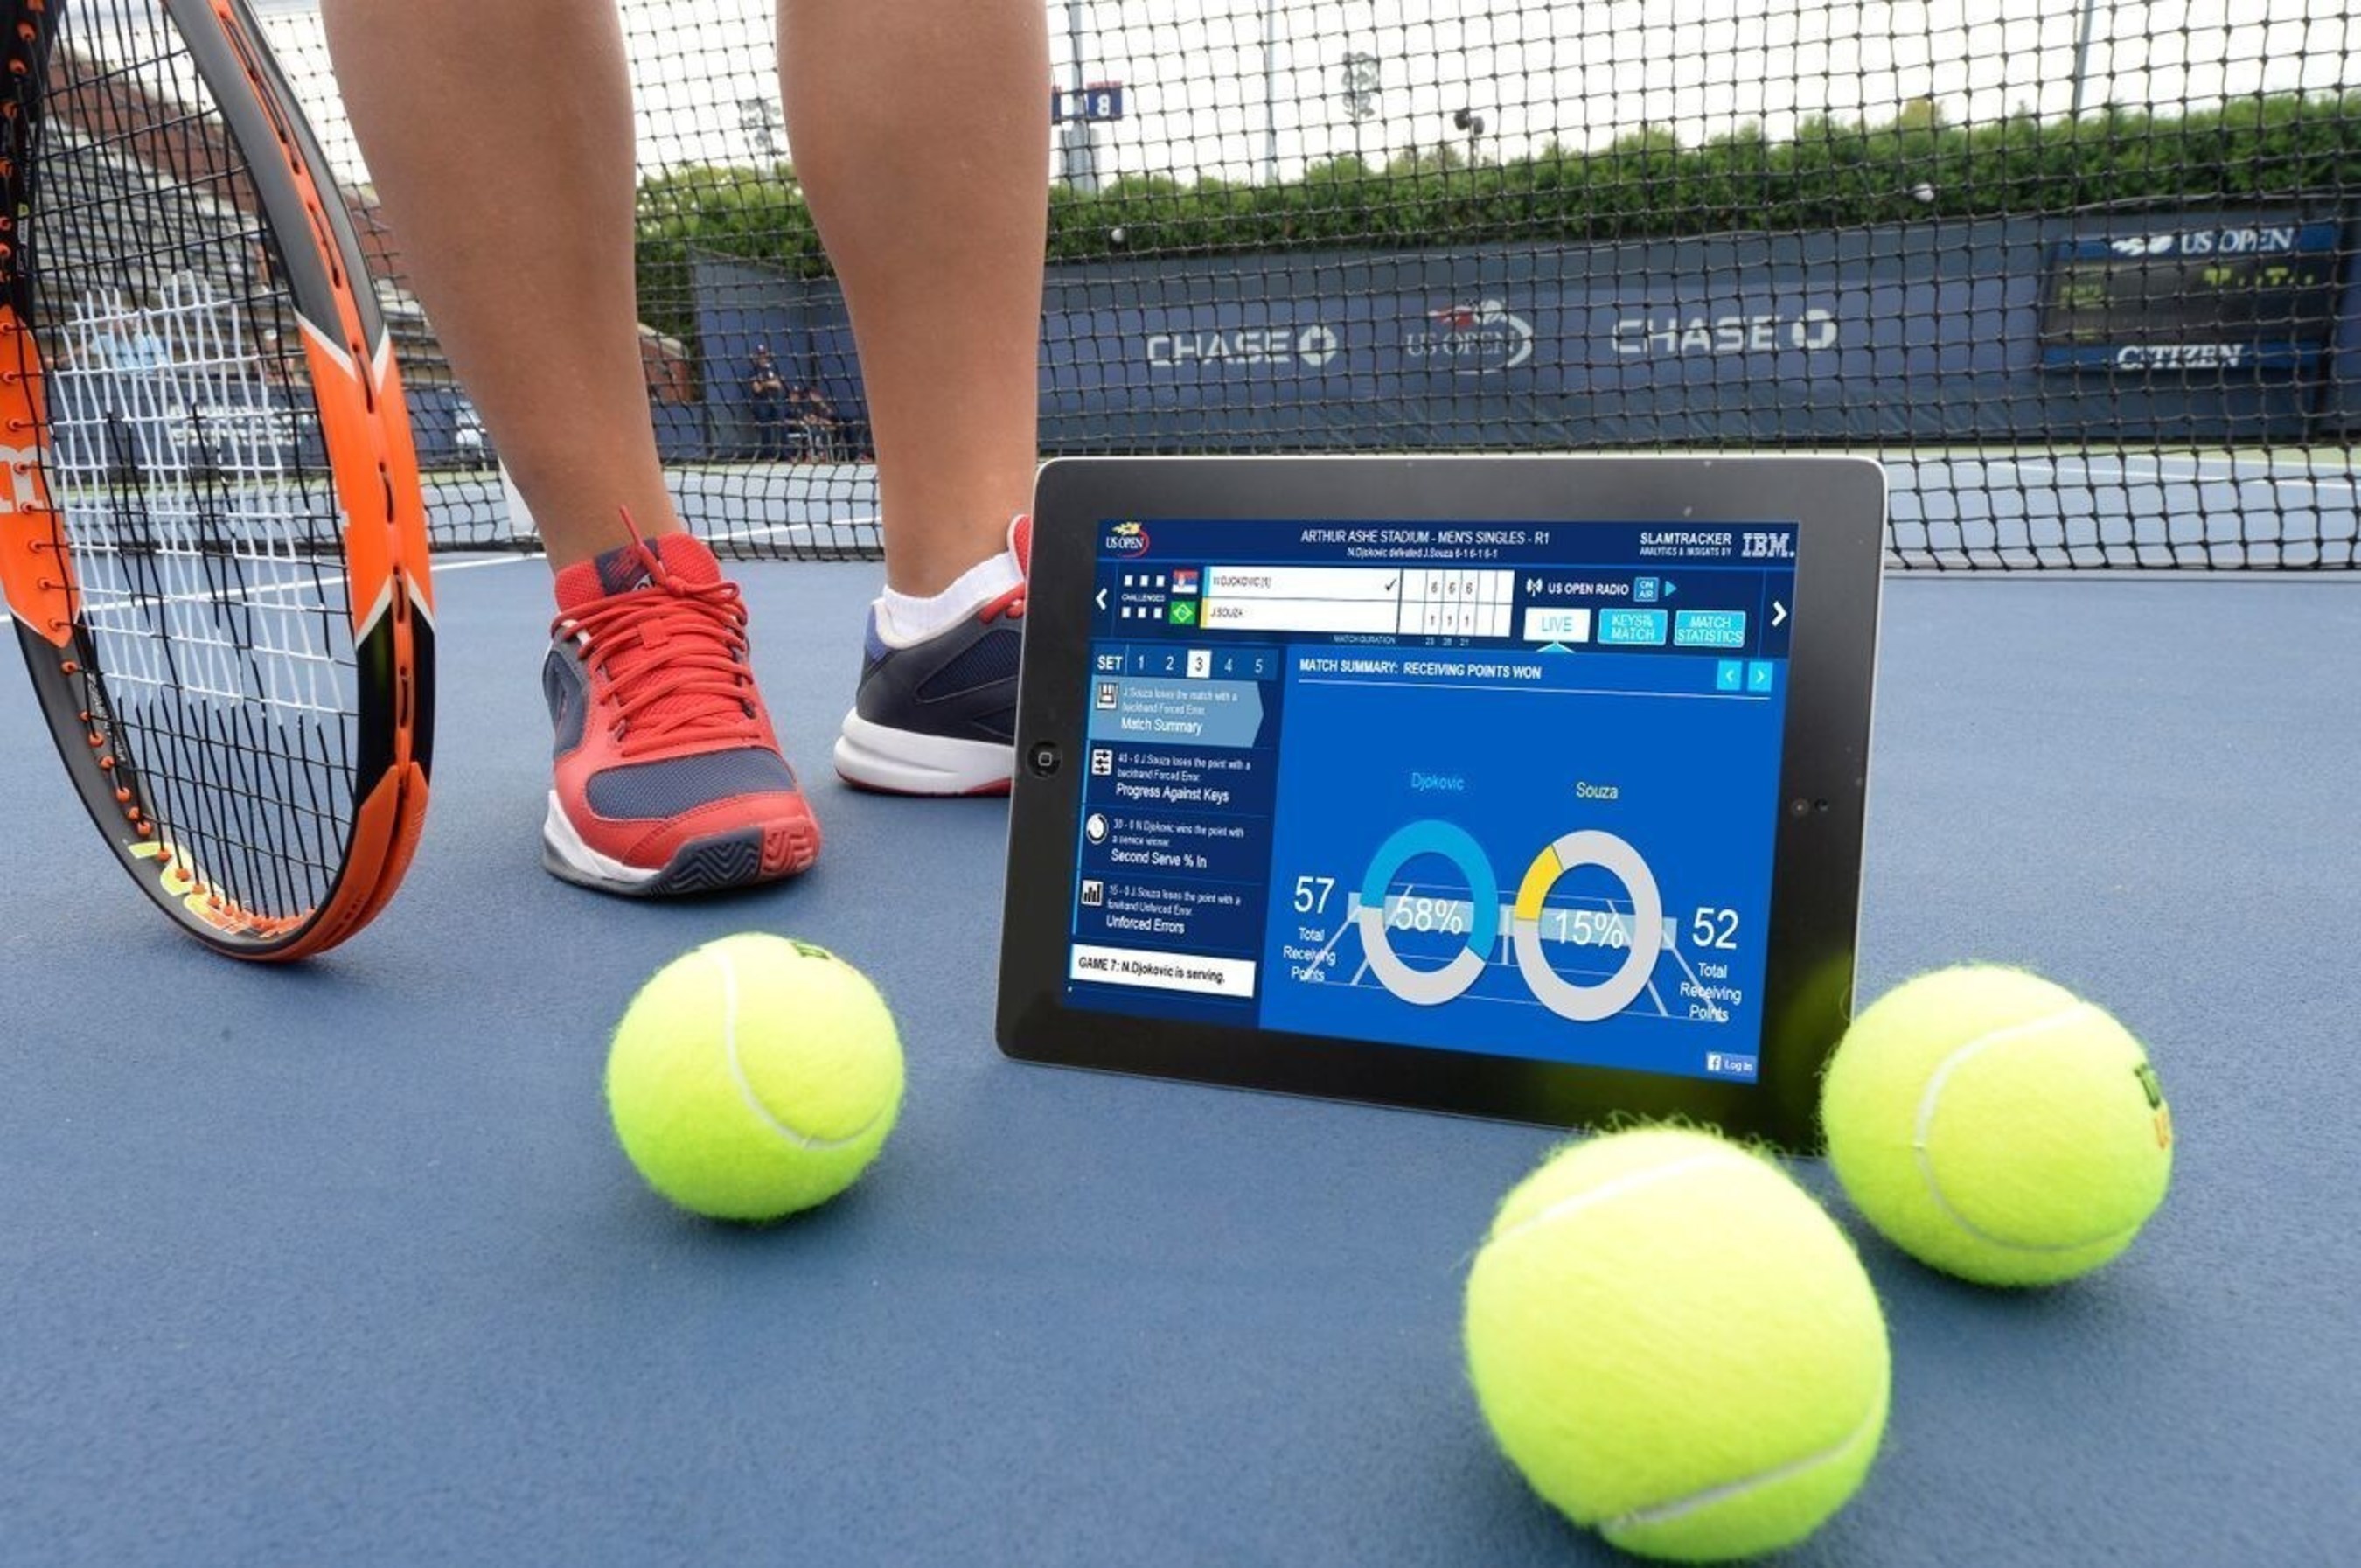 kloon Incident, evenement Oxide IBM Transforms the 2015 US Open with Tennis Apps, Analytics and Acumen